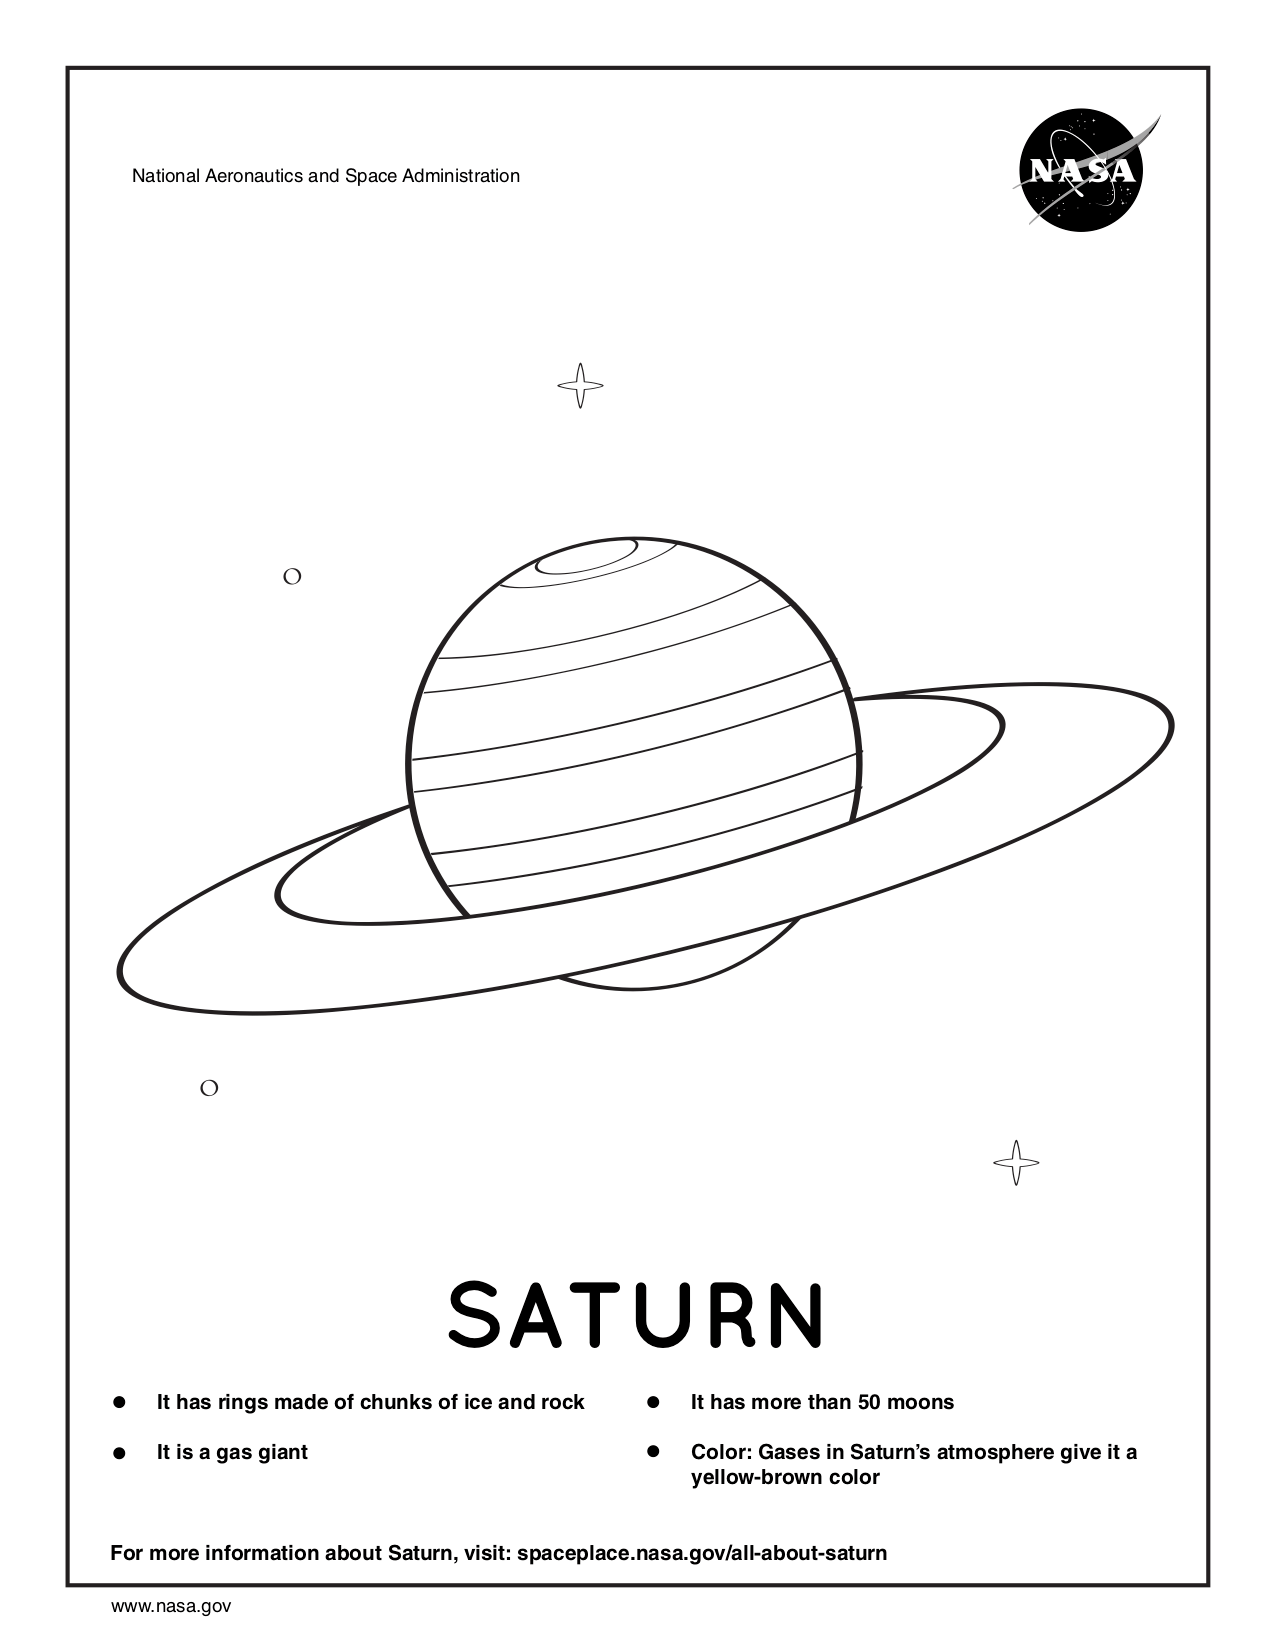 Coloring page for Saturn.